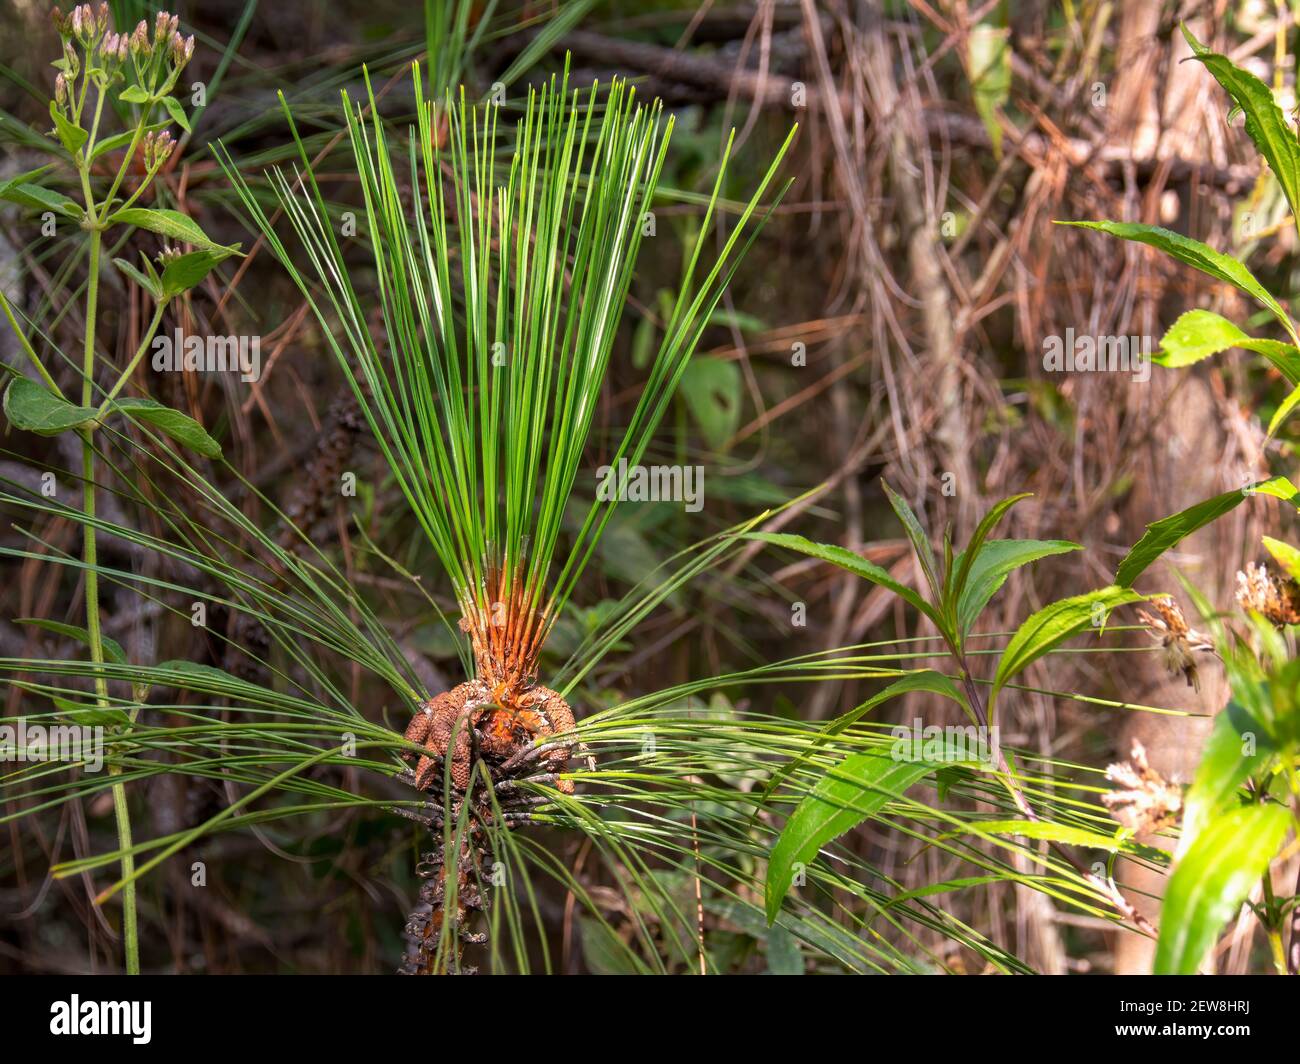 Close-up photography of pine needles, captured in a forest near the colonial town of Villa de Leyva, in the department of Boyaca, Colombia. Stock Photo